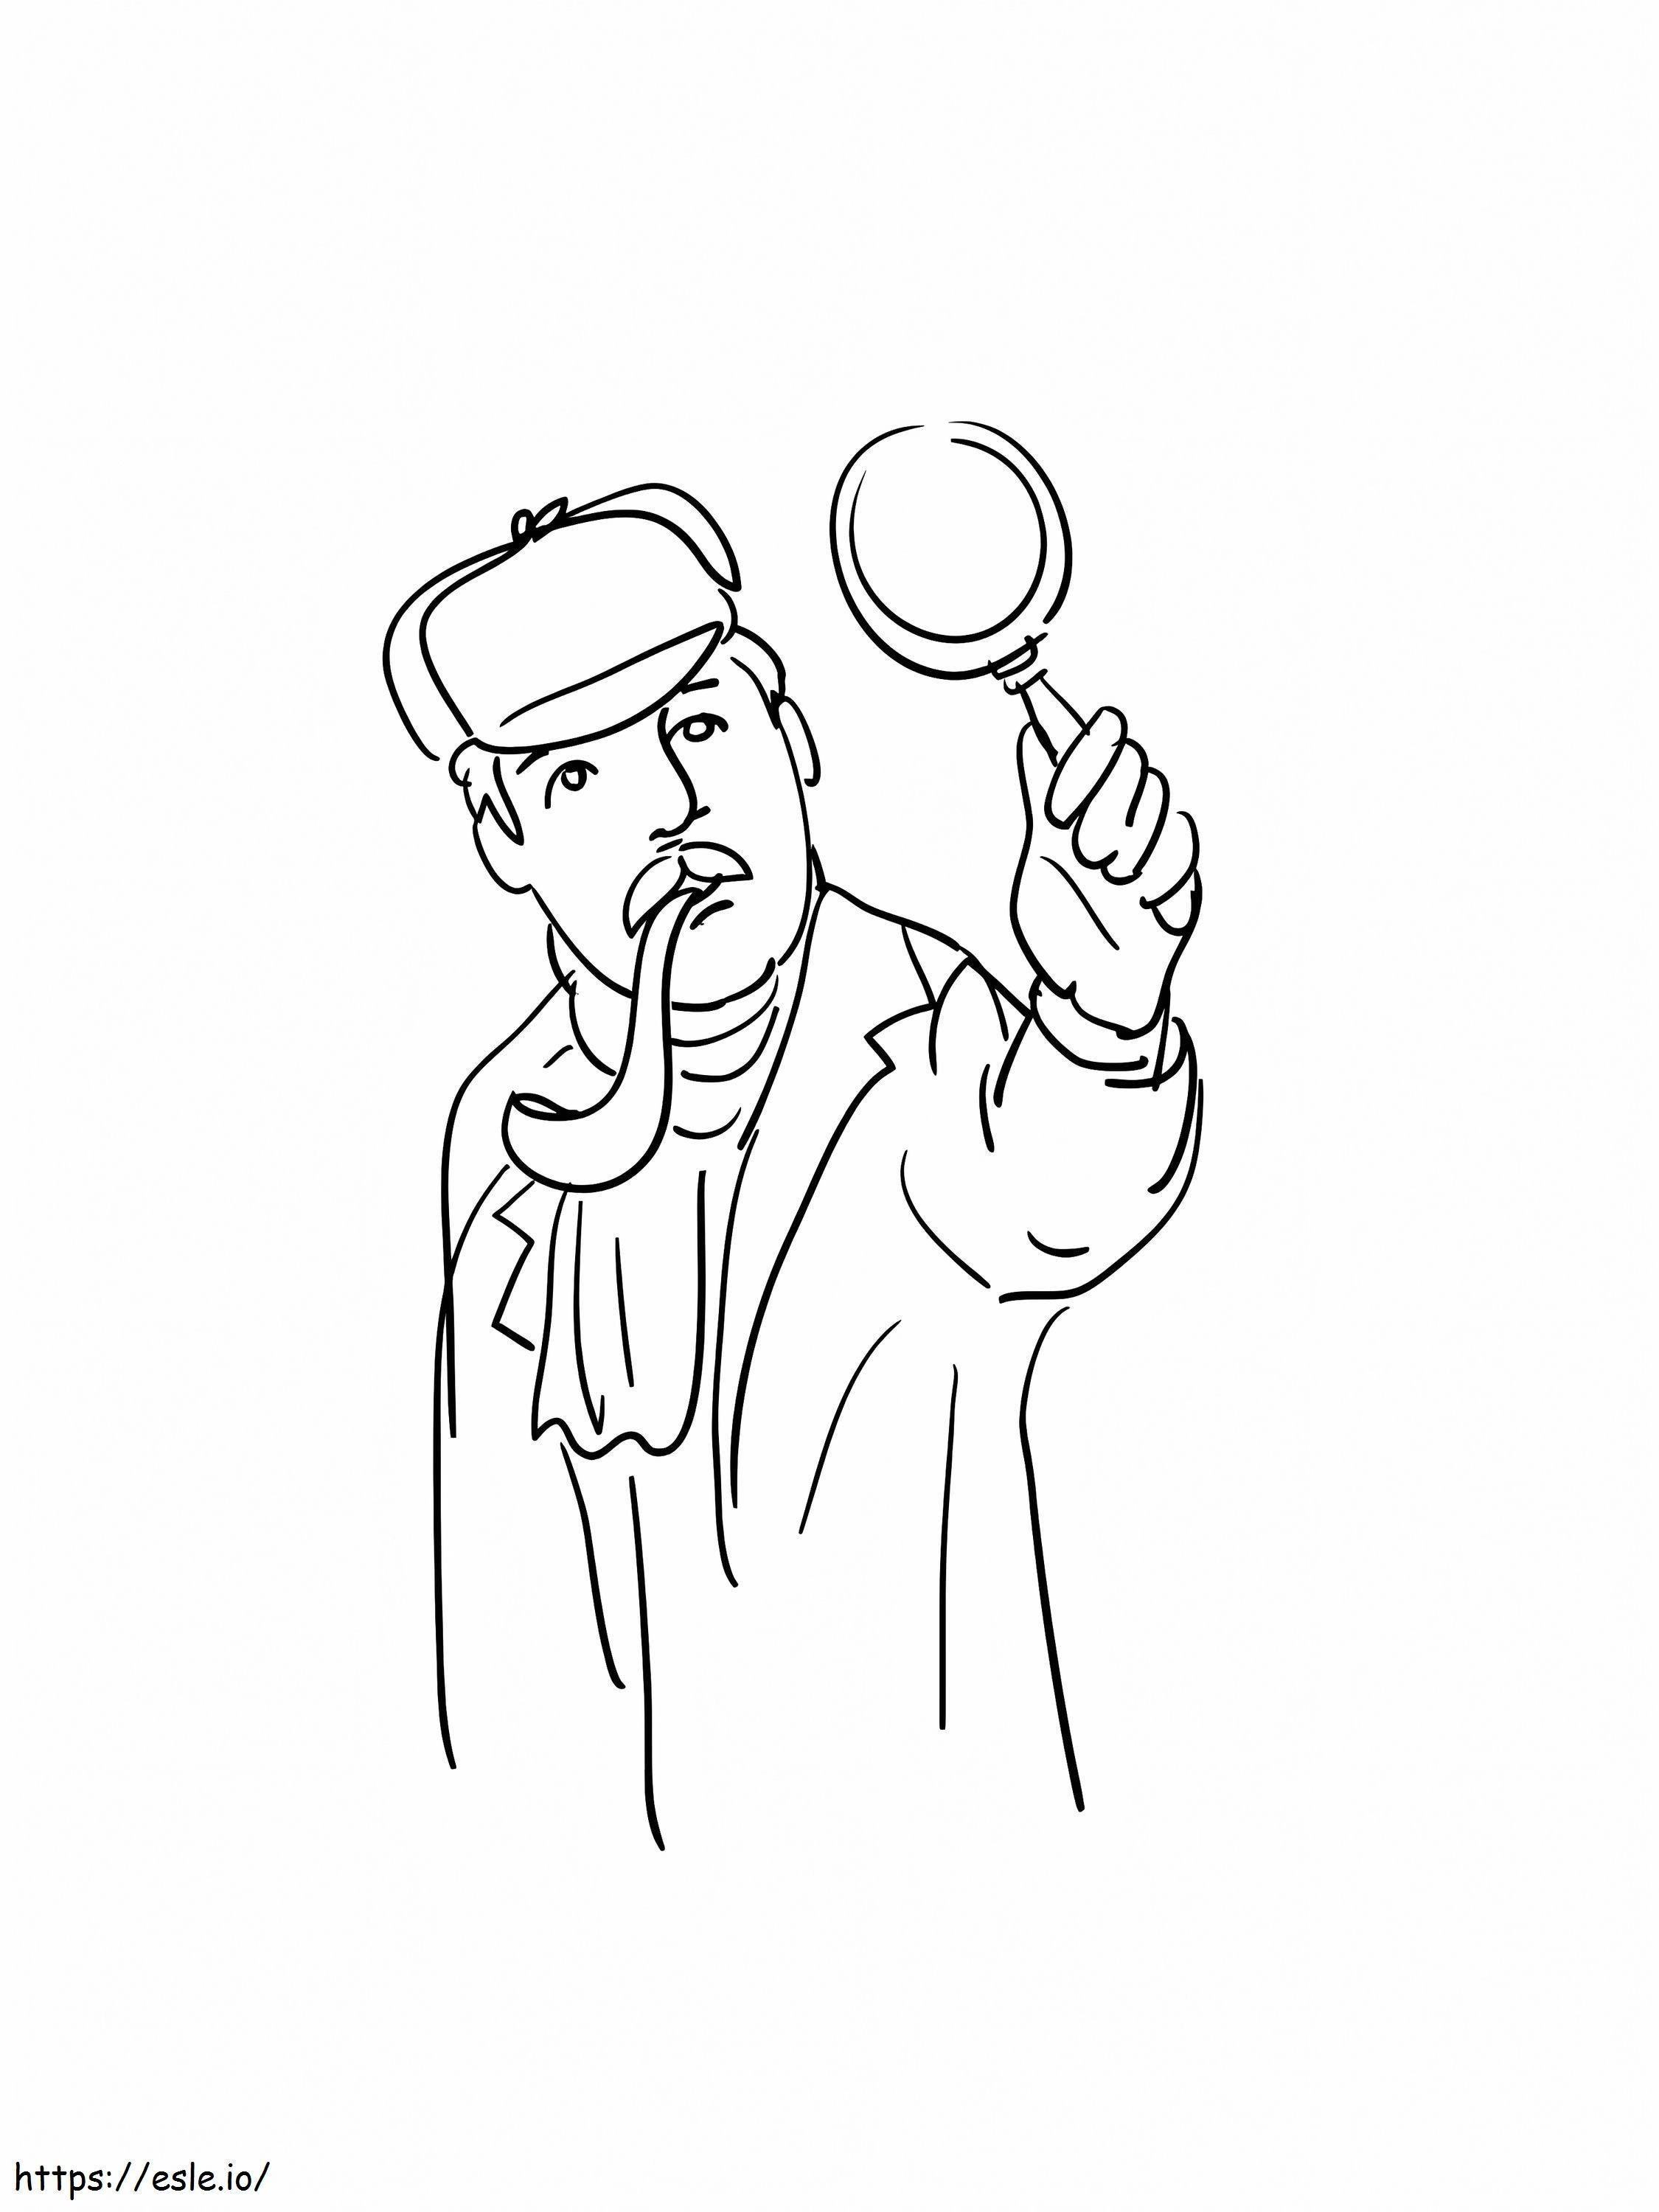 An Old Detective coloring page